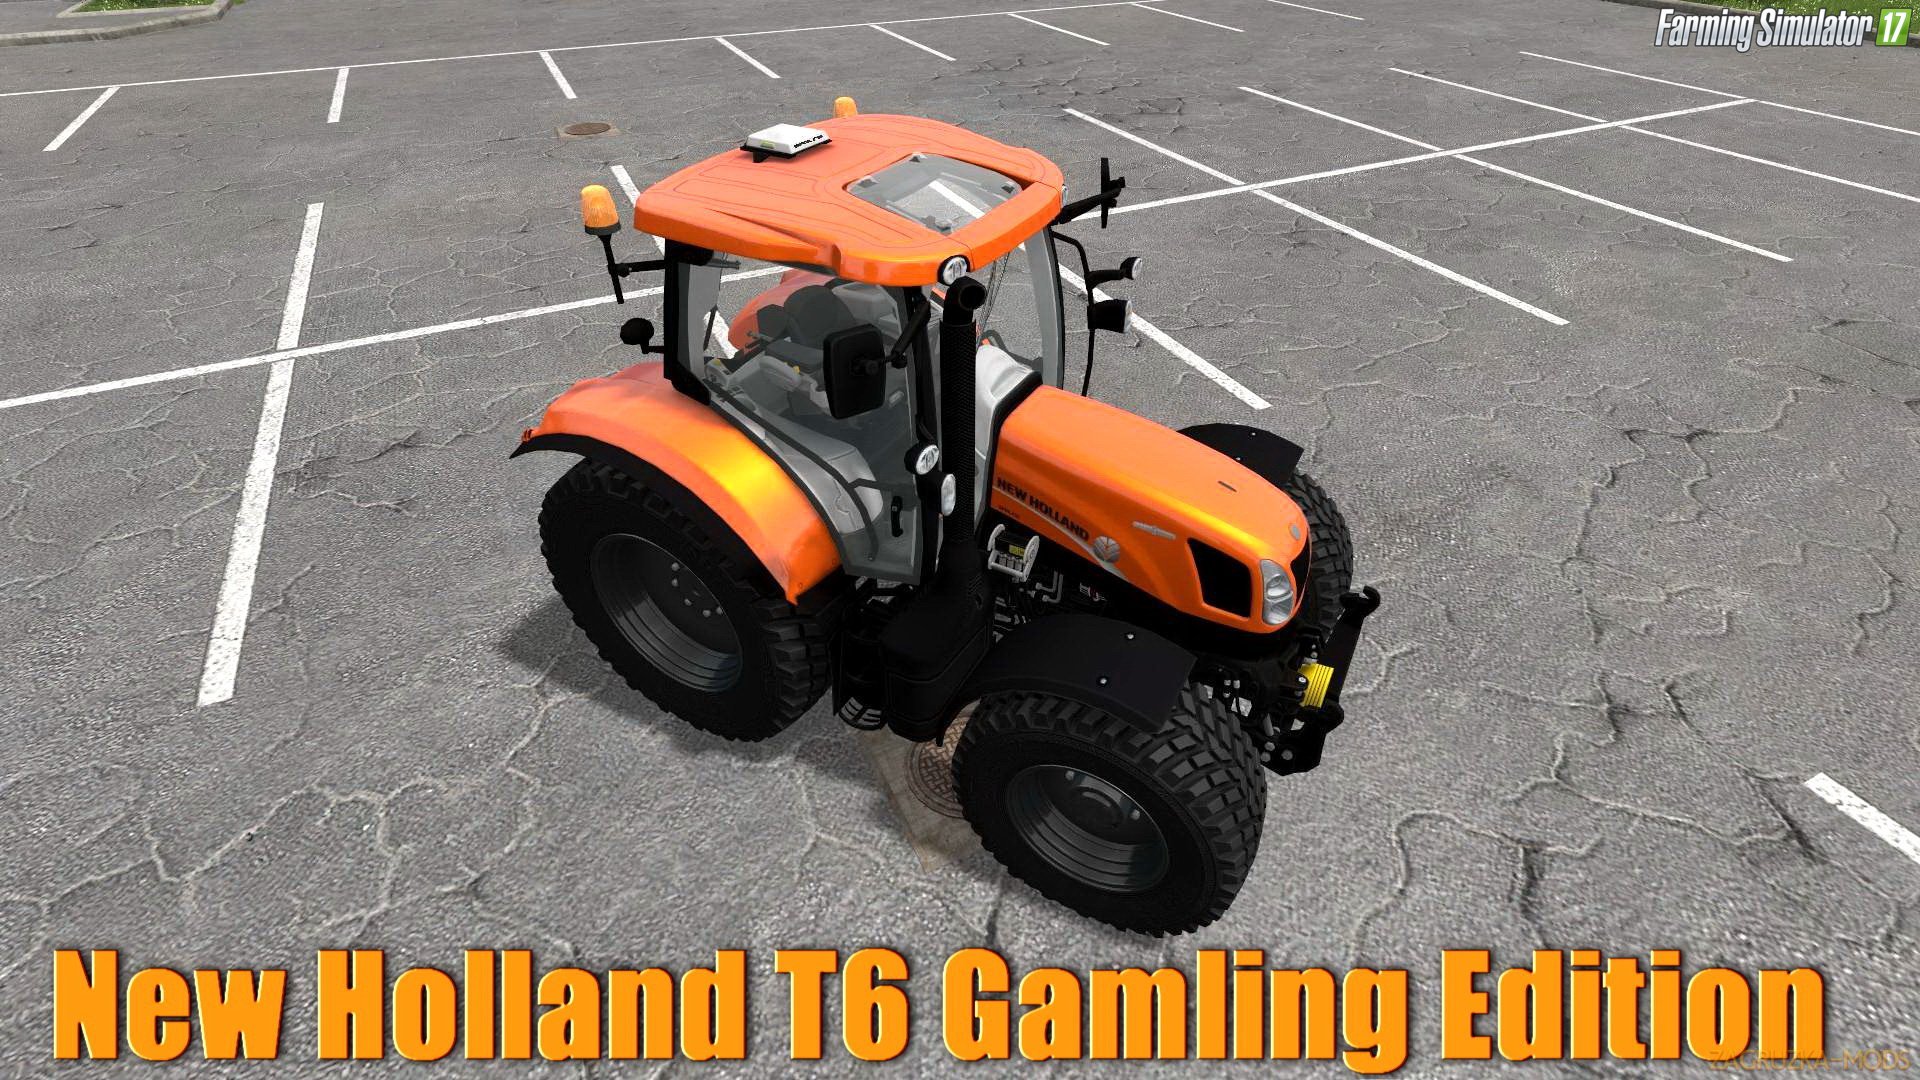 New Holland T6 Gamling Edition v1.0.0.1 for FS 17